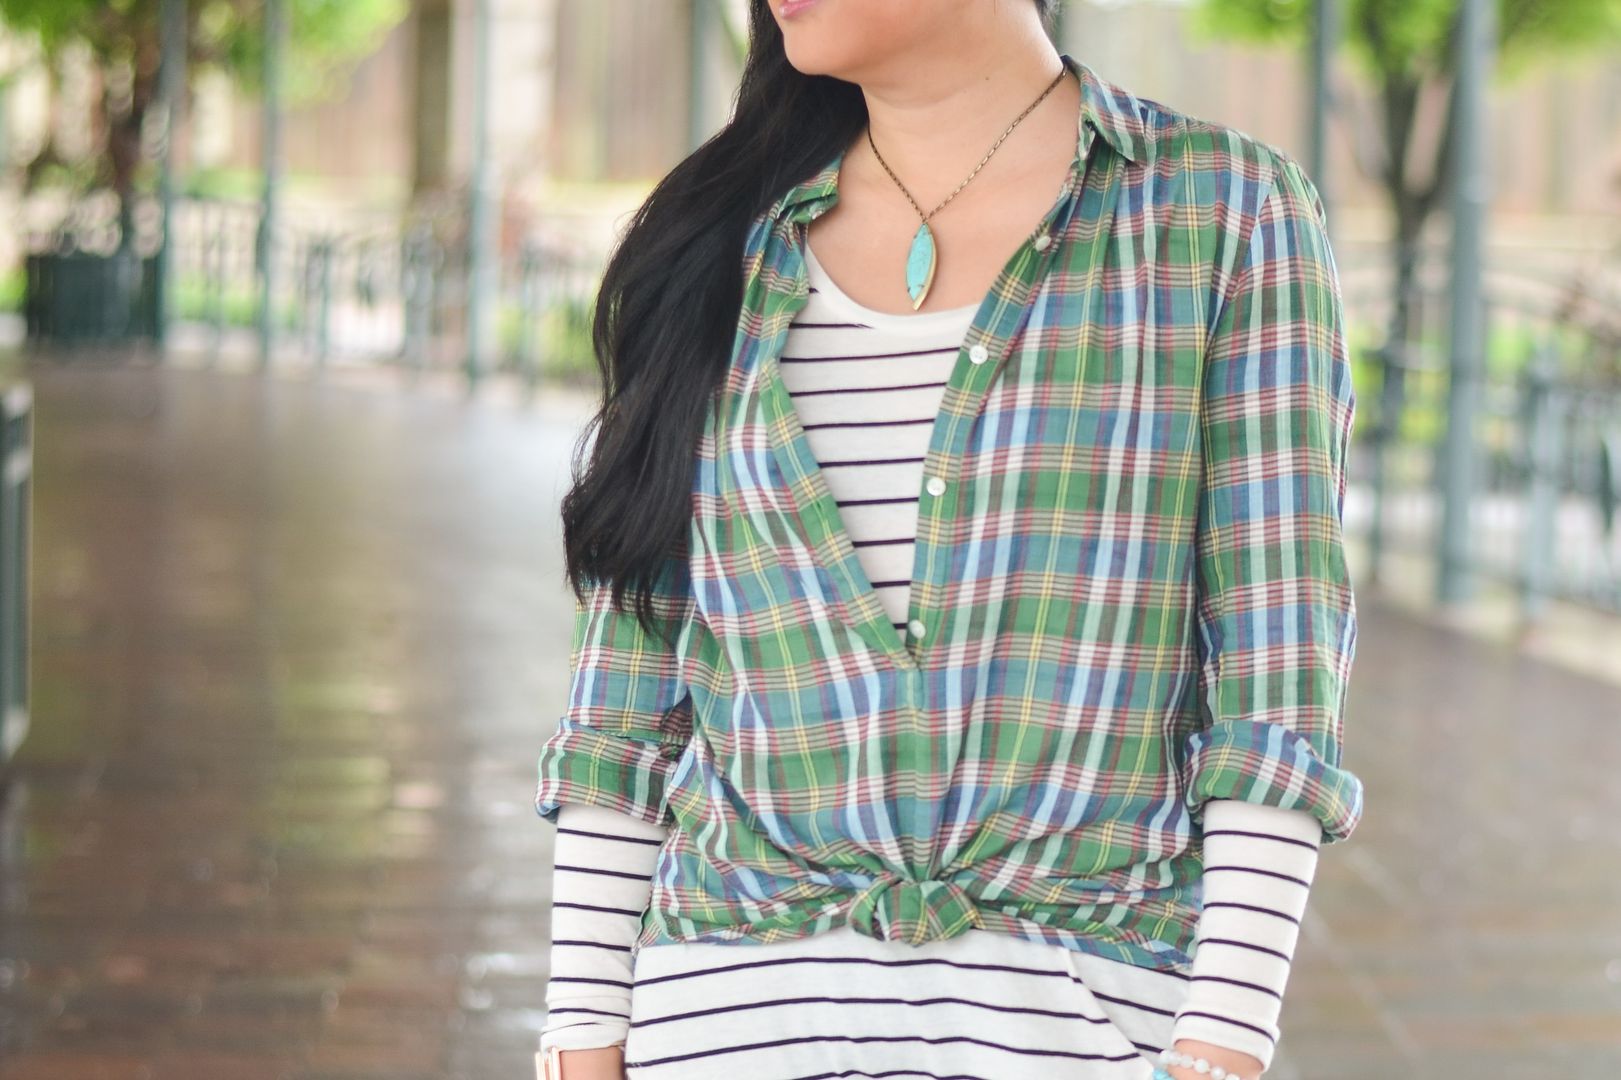 Plaid shirt over striped tee outfit